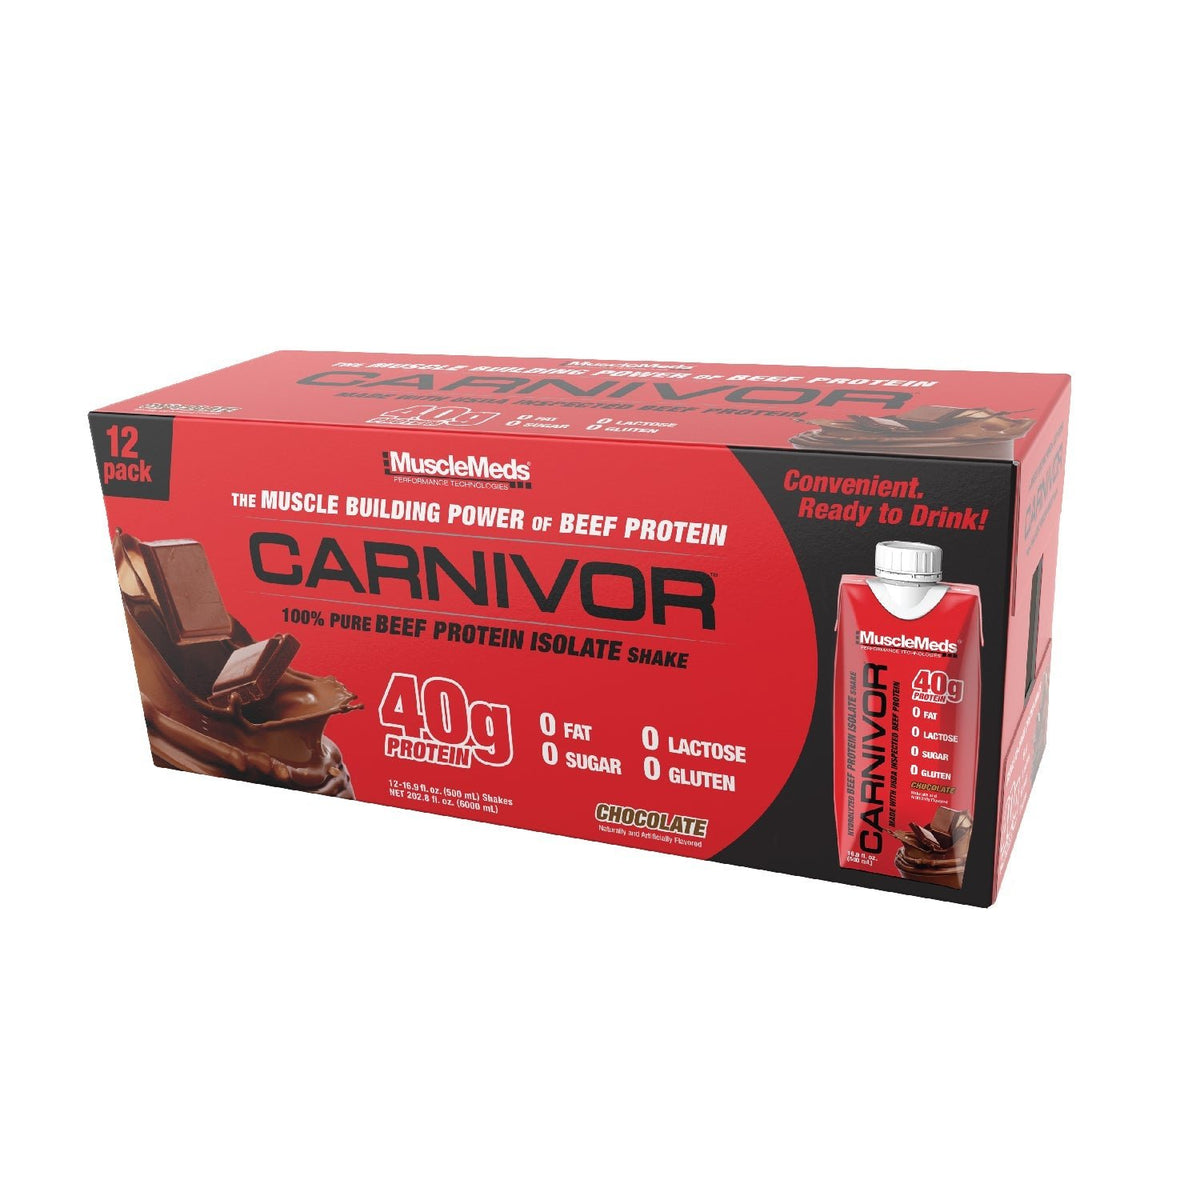 NFLA: Carnivor RTD - 12 Pack / 40g of Beef Protein Isolate / Protein Shake